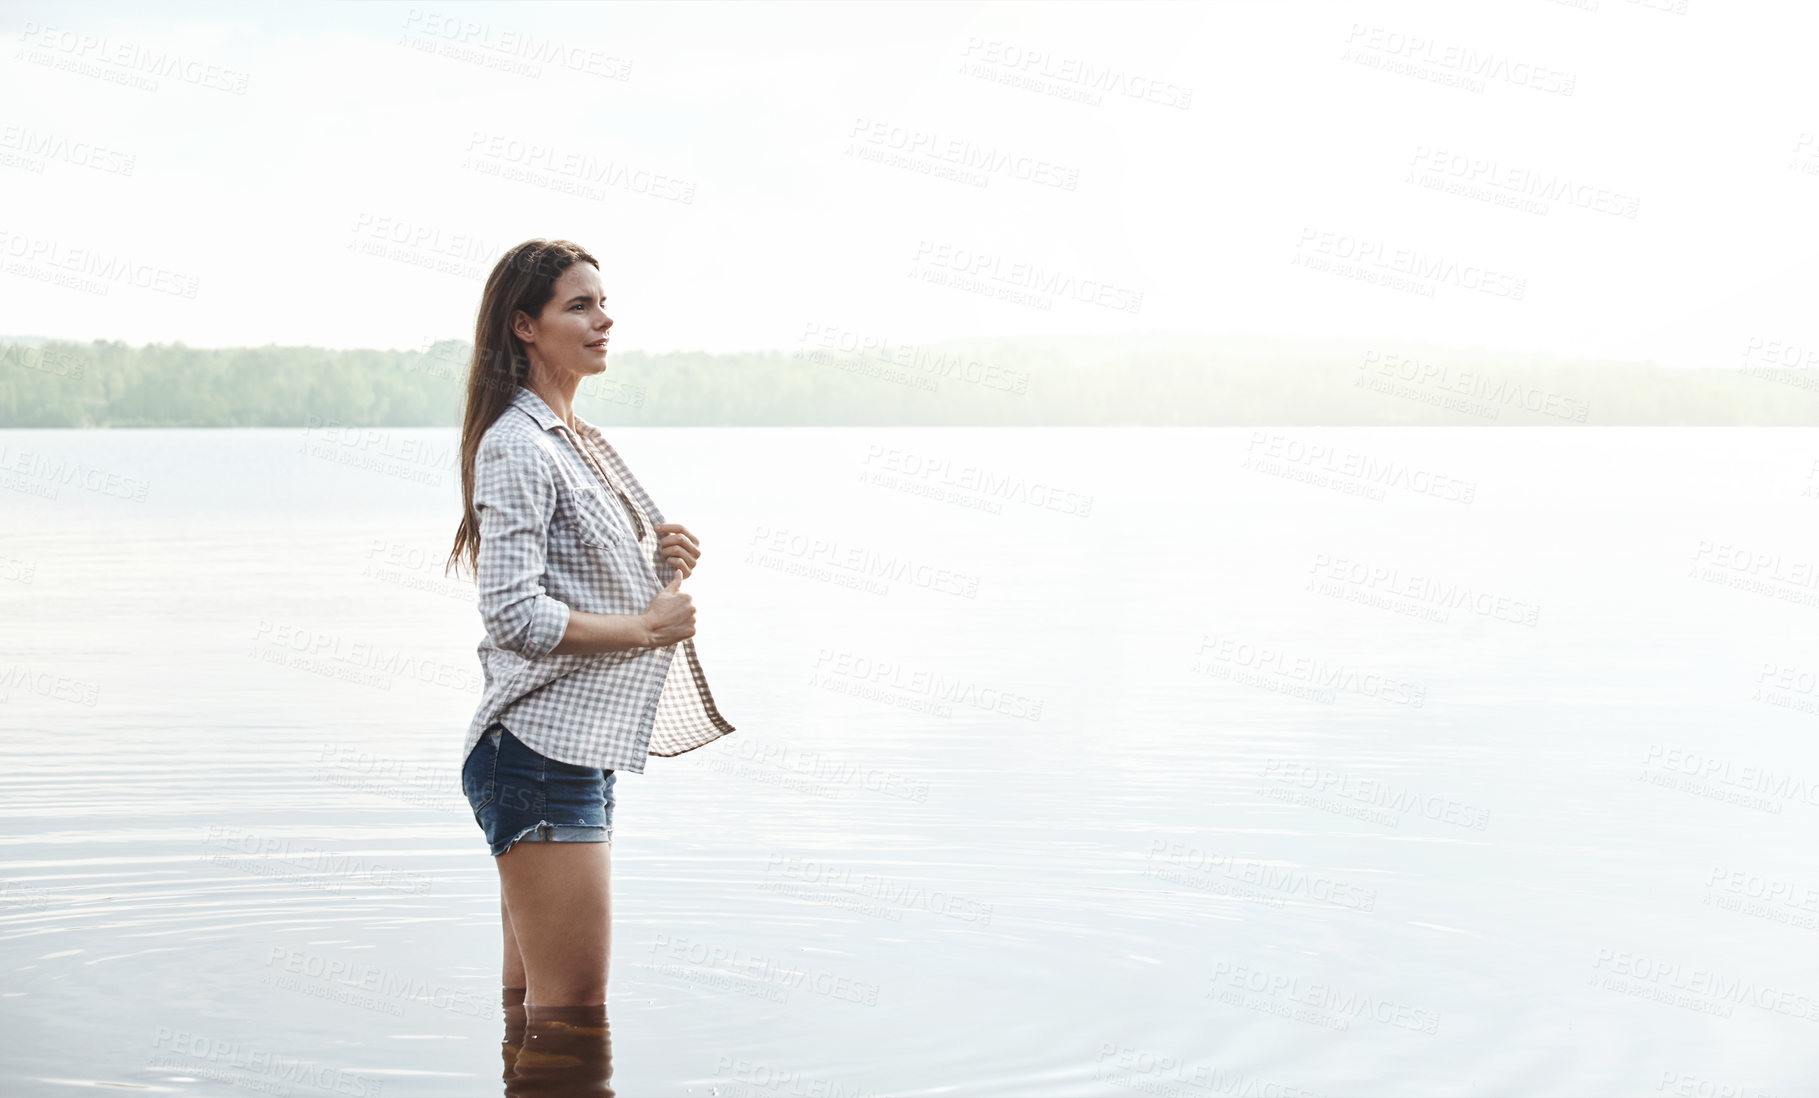 Buy stock photo Shot of an attractive young woman standing in a lake